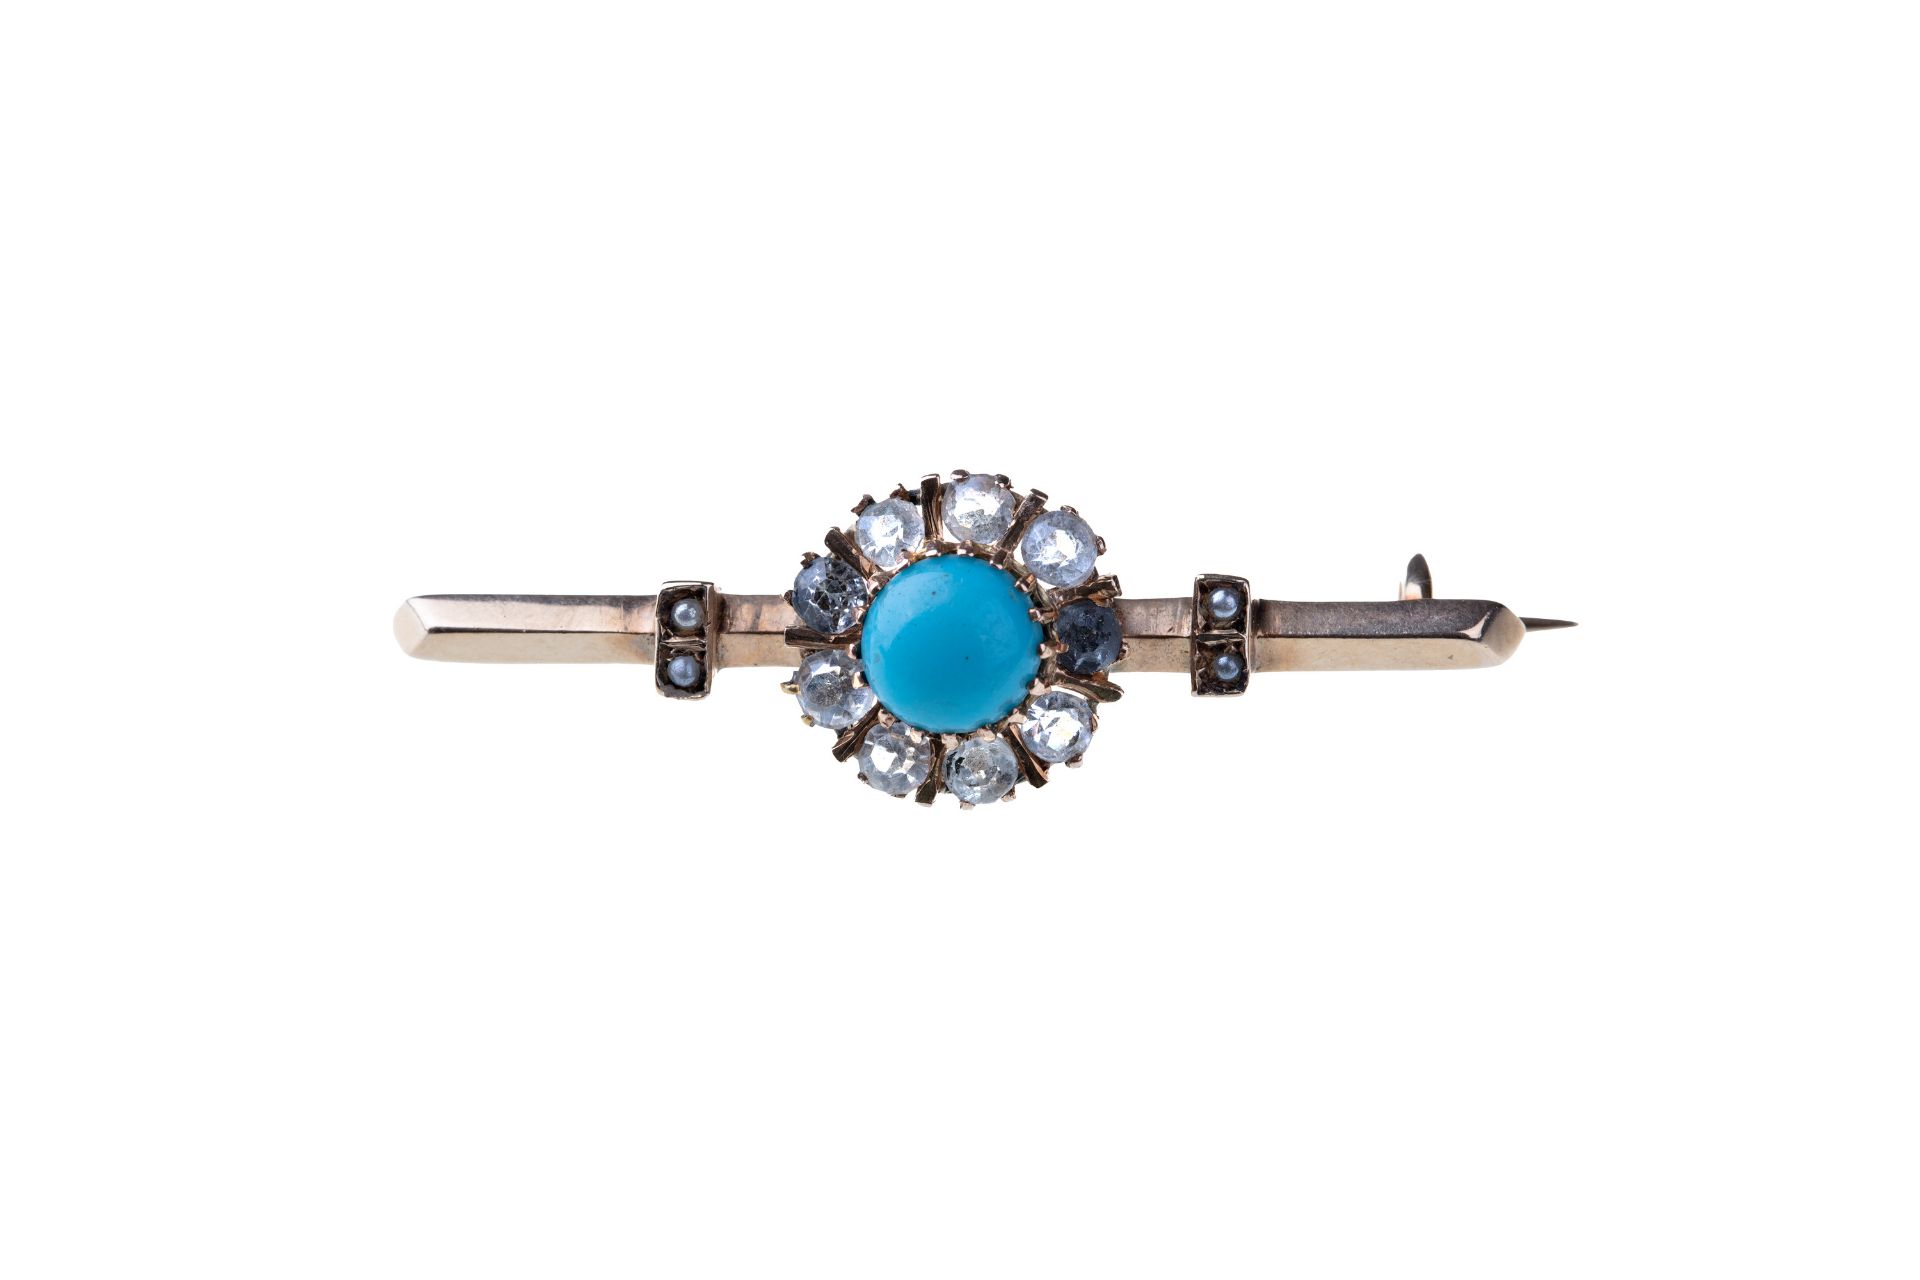 GOLD BROOCH WITH TURQUOISE | (Austria - Hungary - 2nd half of the 19th century)